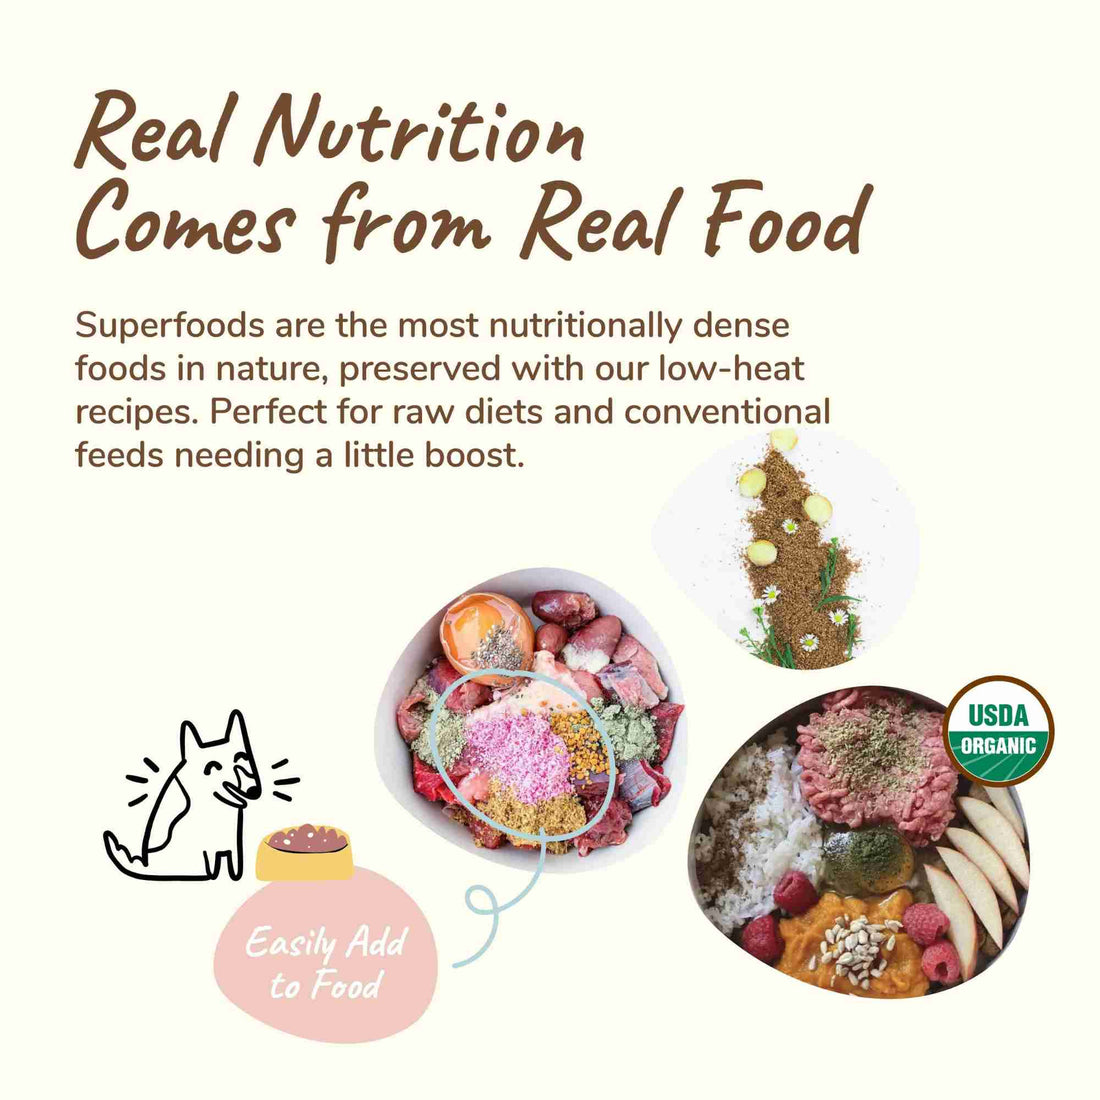 Healthy Calm Organic Calming supplement with chamomile and thyme herbal blend for dogs and cats usda organic- real food comes from real nutrition